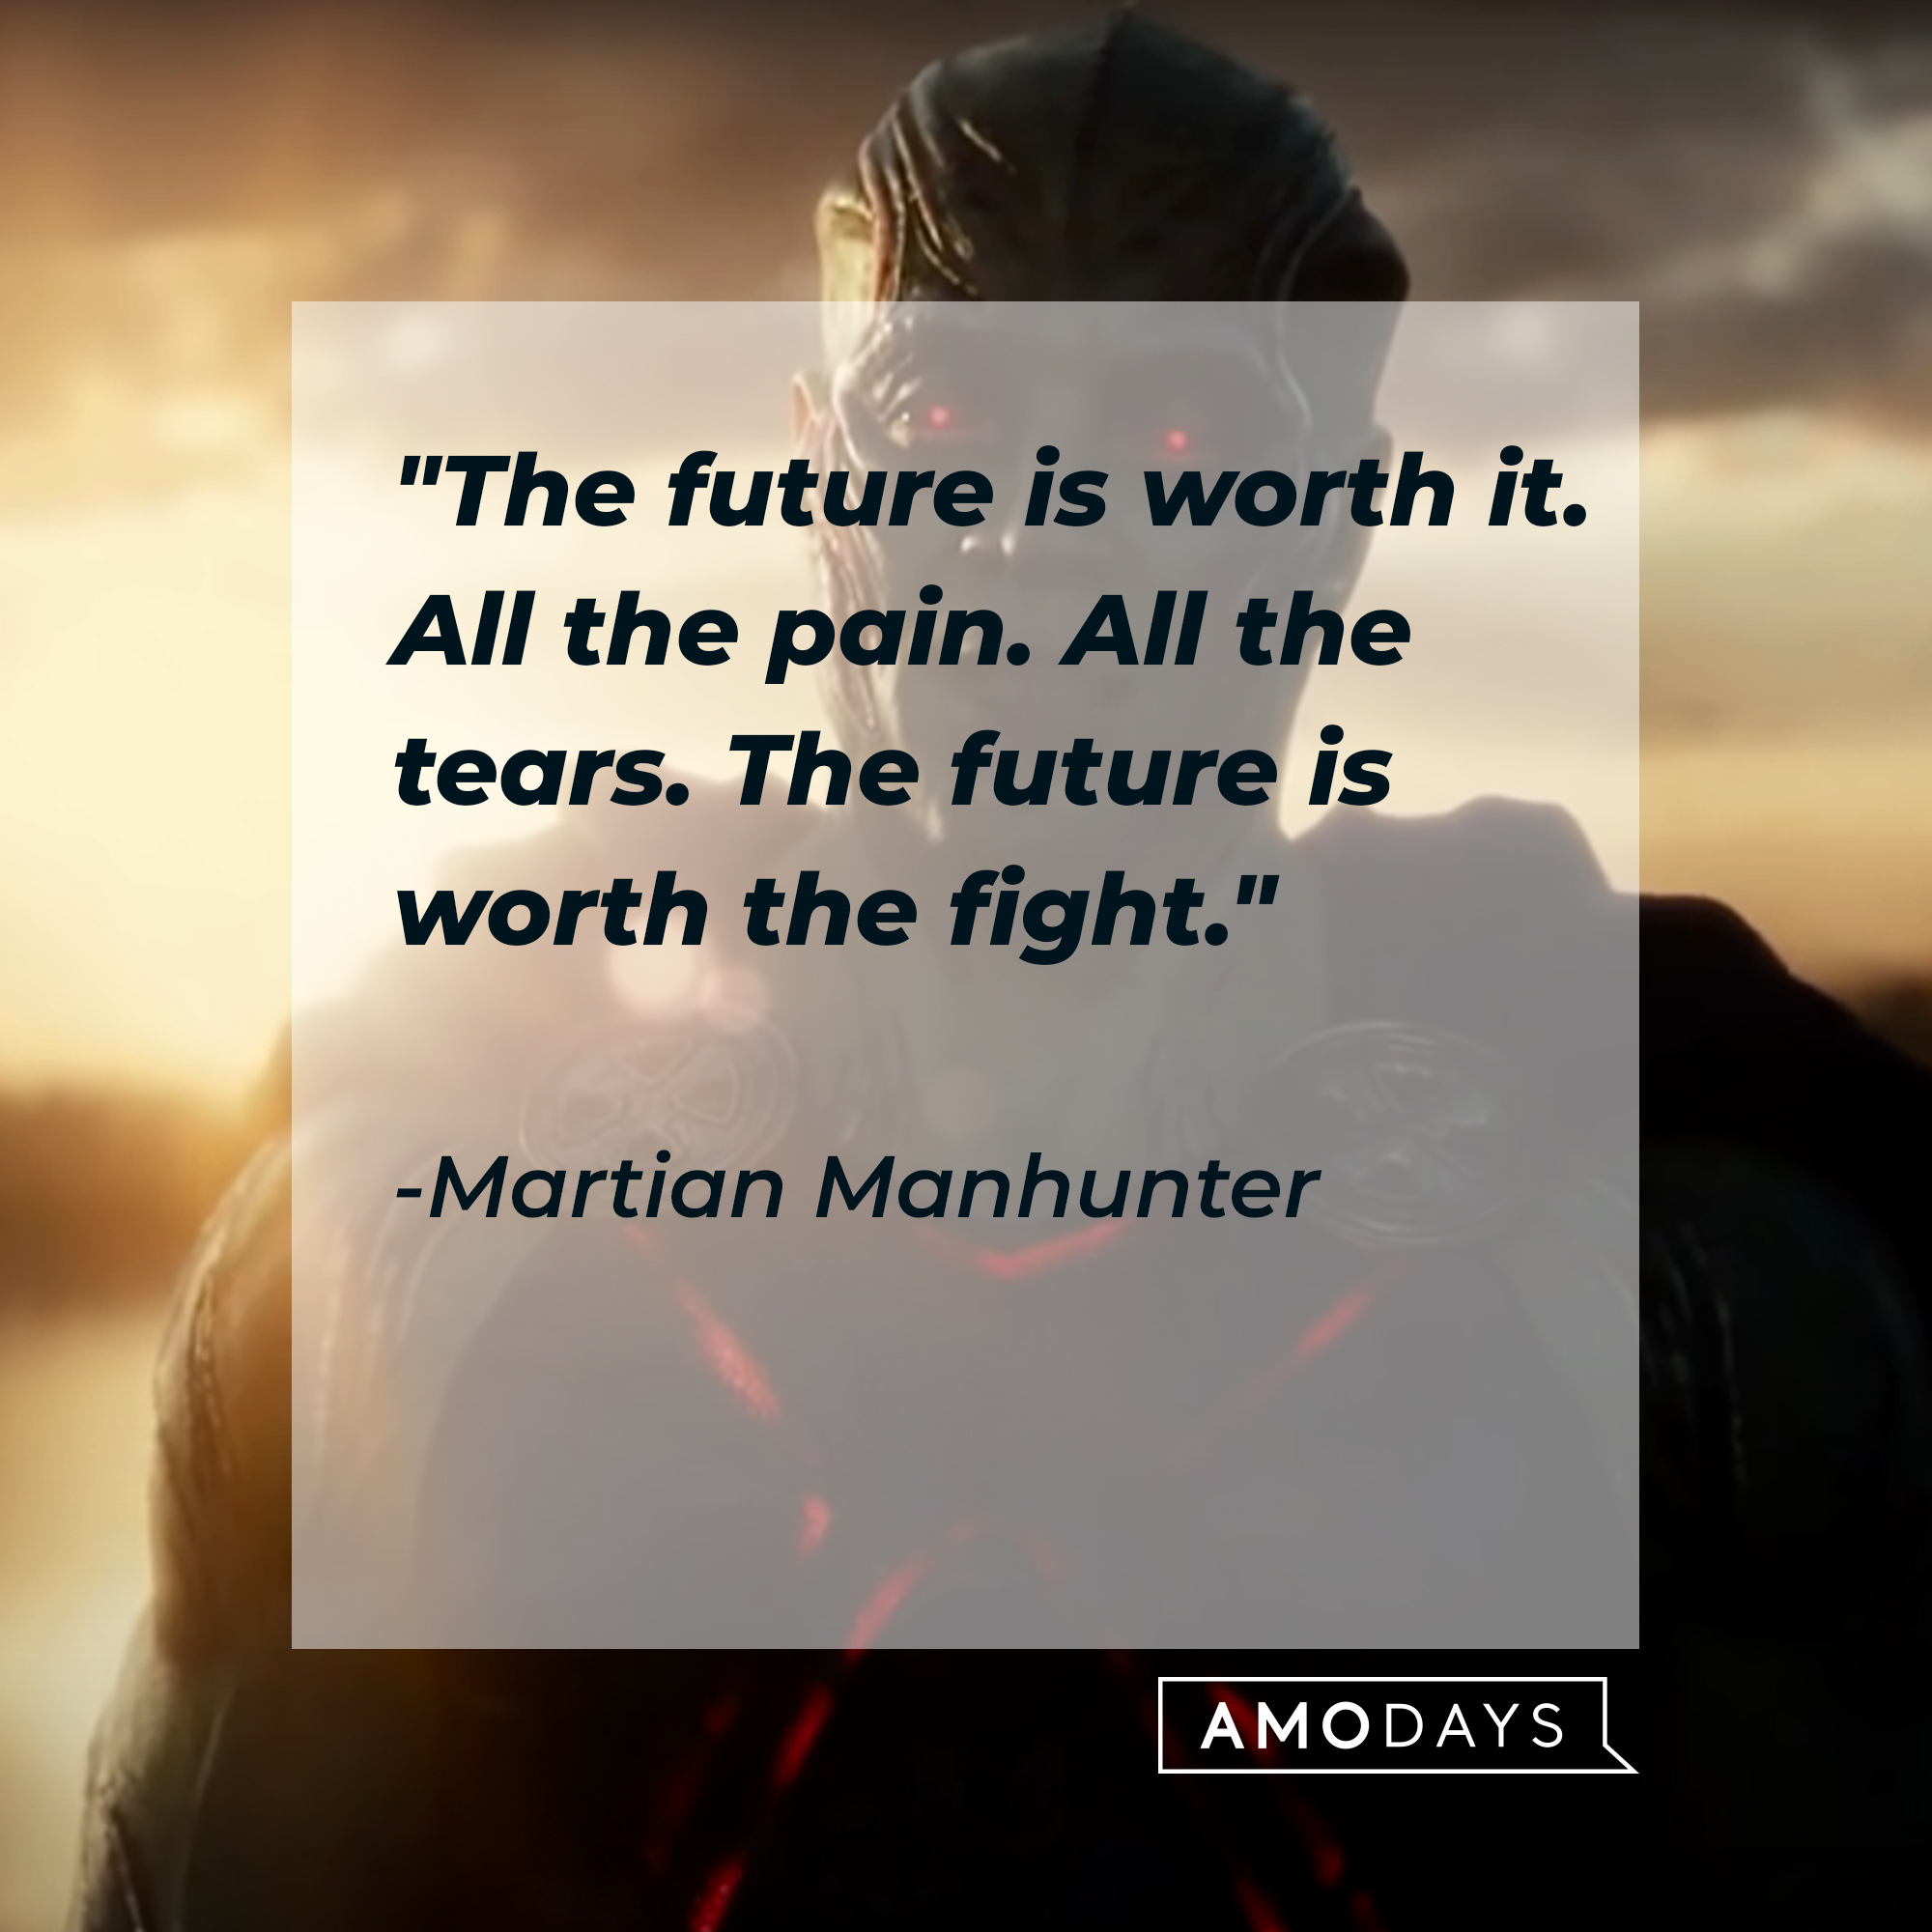 Martian Manhunter's quote: "The future is worth it. All the pain. All the tears. The future is worth the fight." | Source: facebook.com/dc